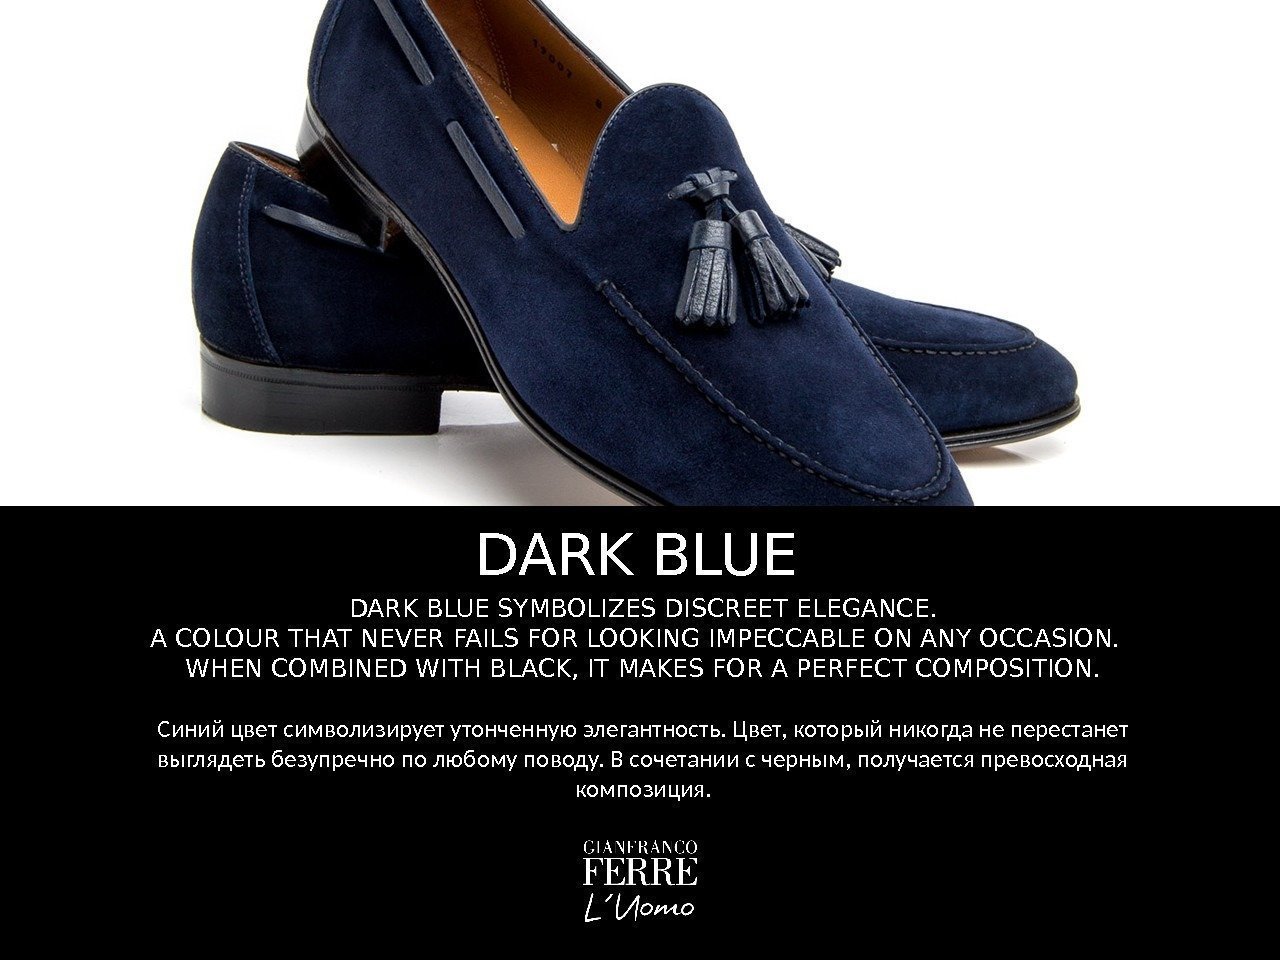 DARK BLUE SYMBOLIZES DISCREET ELEGANCE. A COLOUR THAT NEVER FAILS FOR LOOKING IMPECCABLE ON